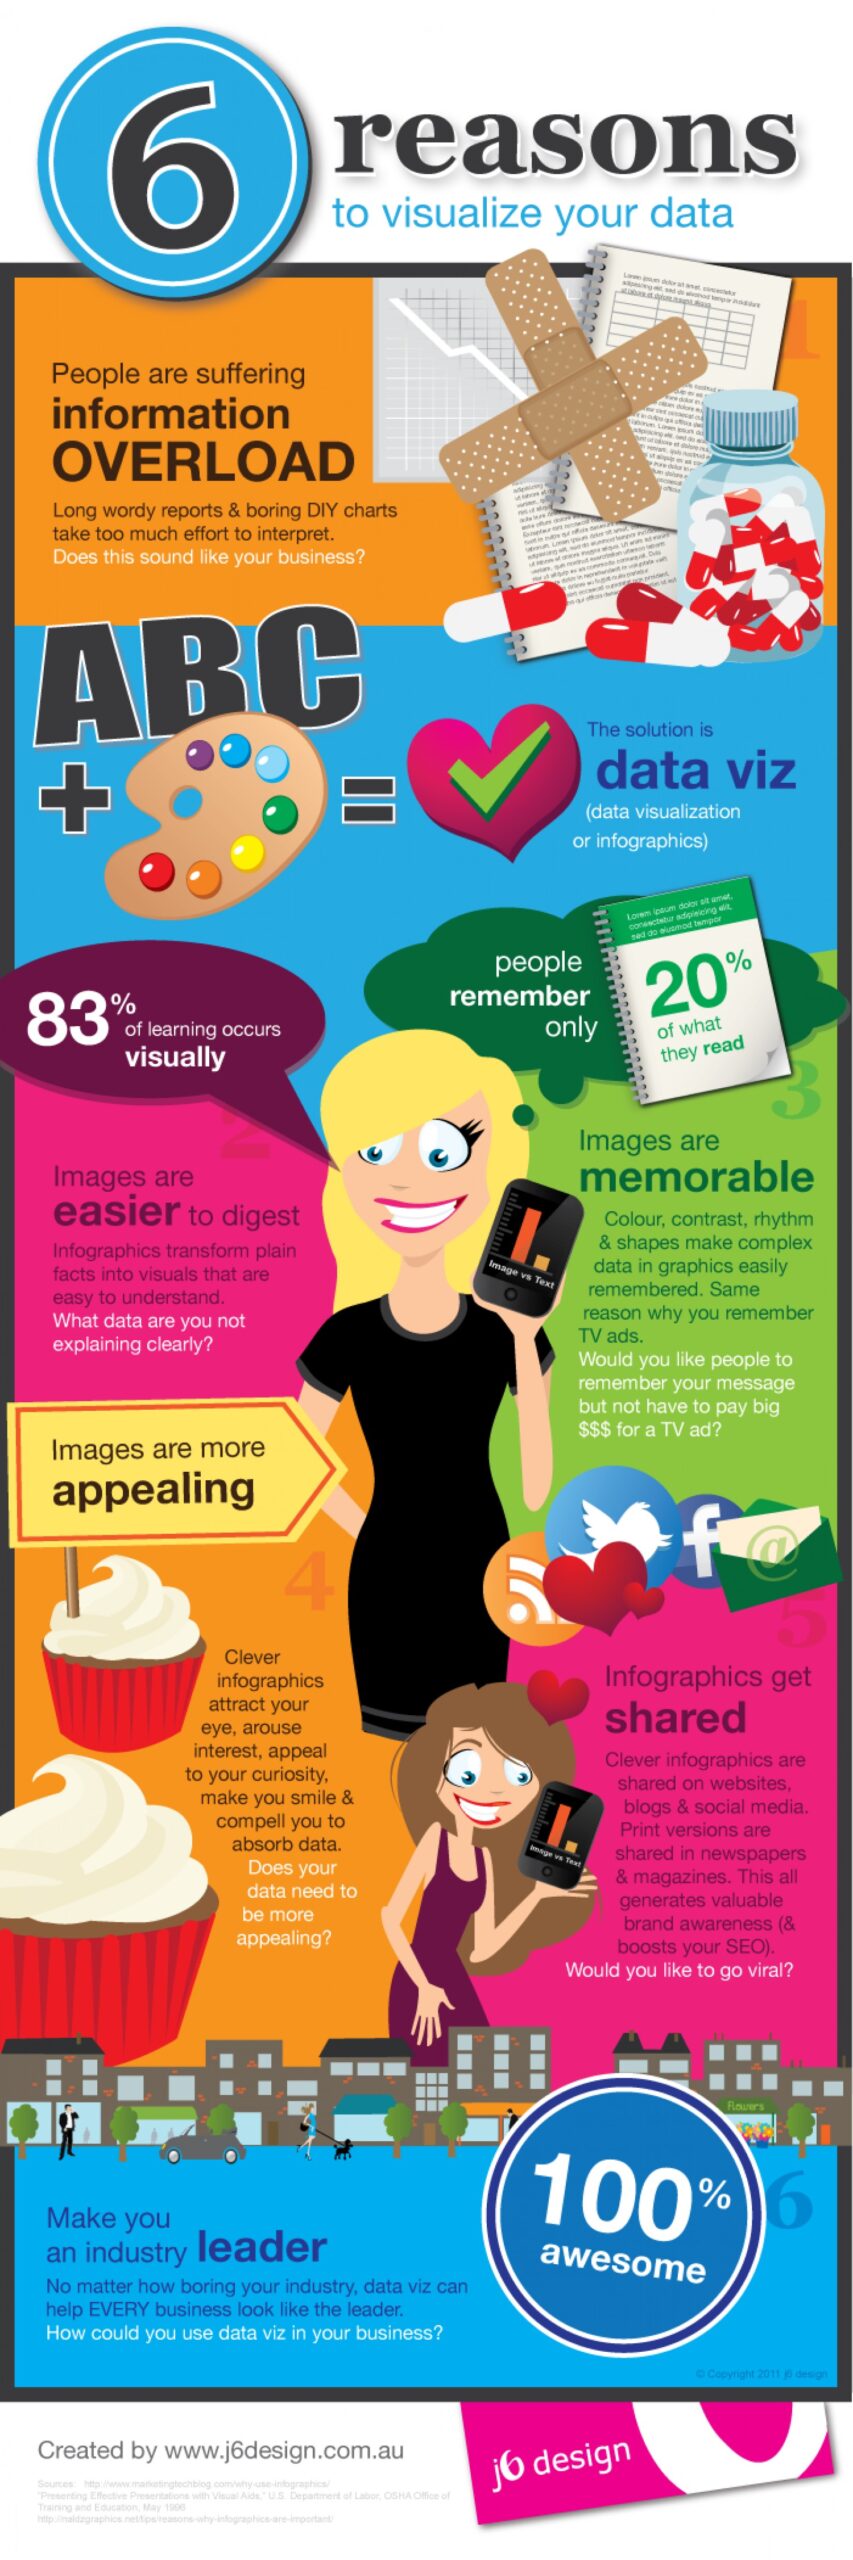 Fun Facts About Health #infographic - Visualistan